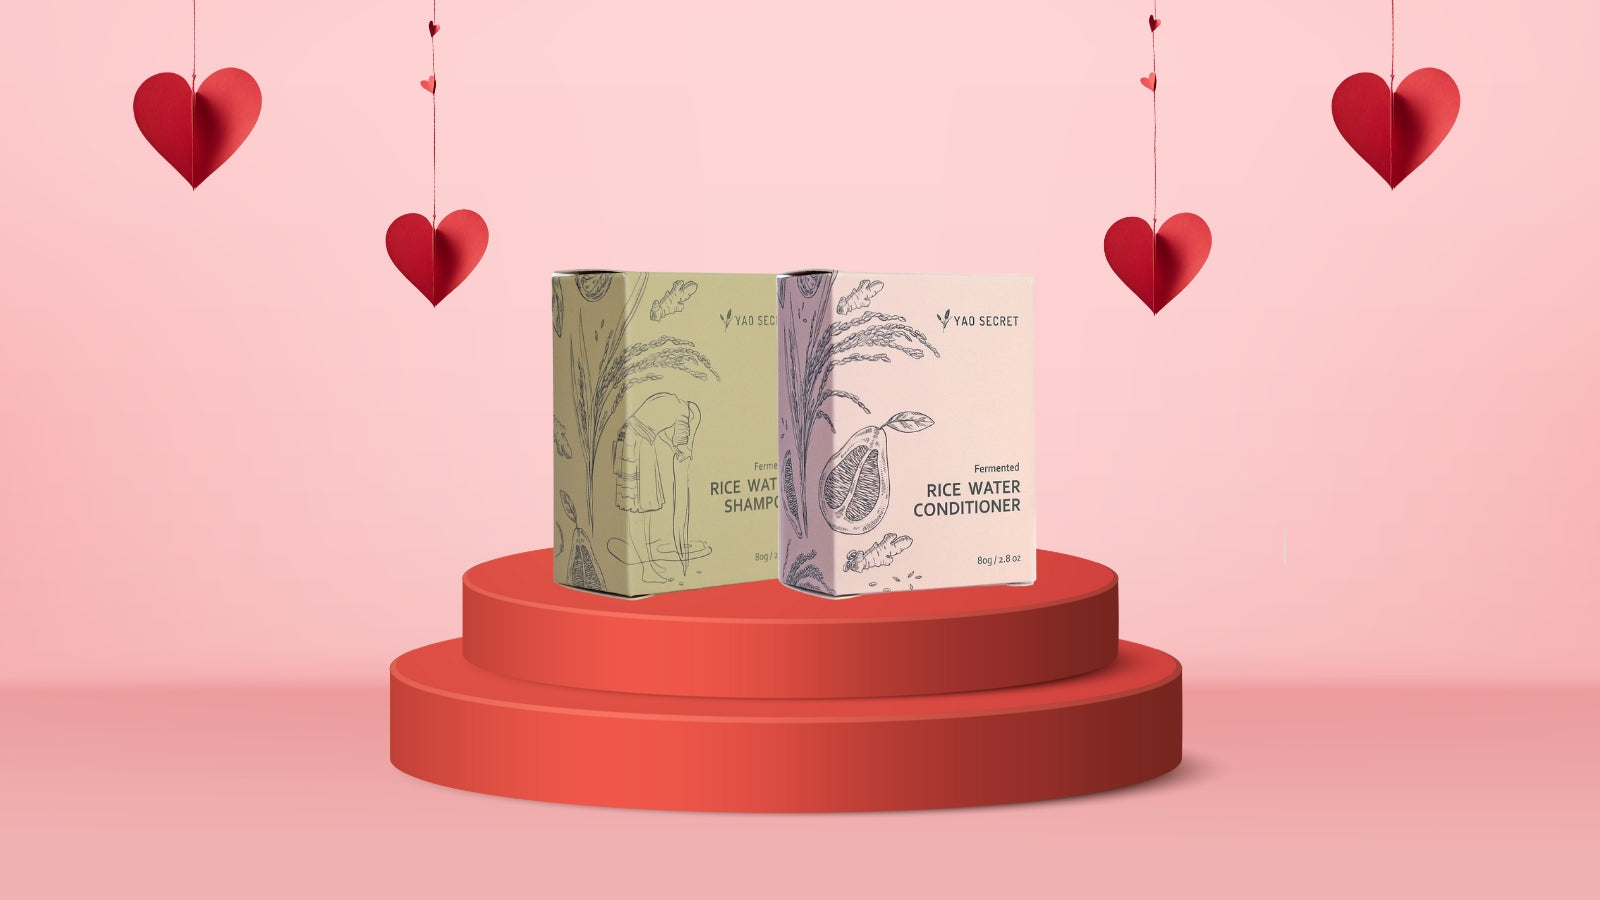 Yao Secret's Valentine's Gift Guide for Eco-Conscious Shoppers